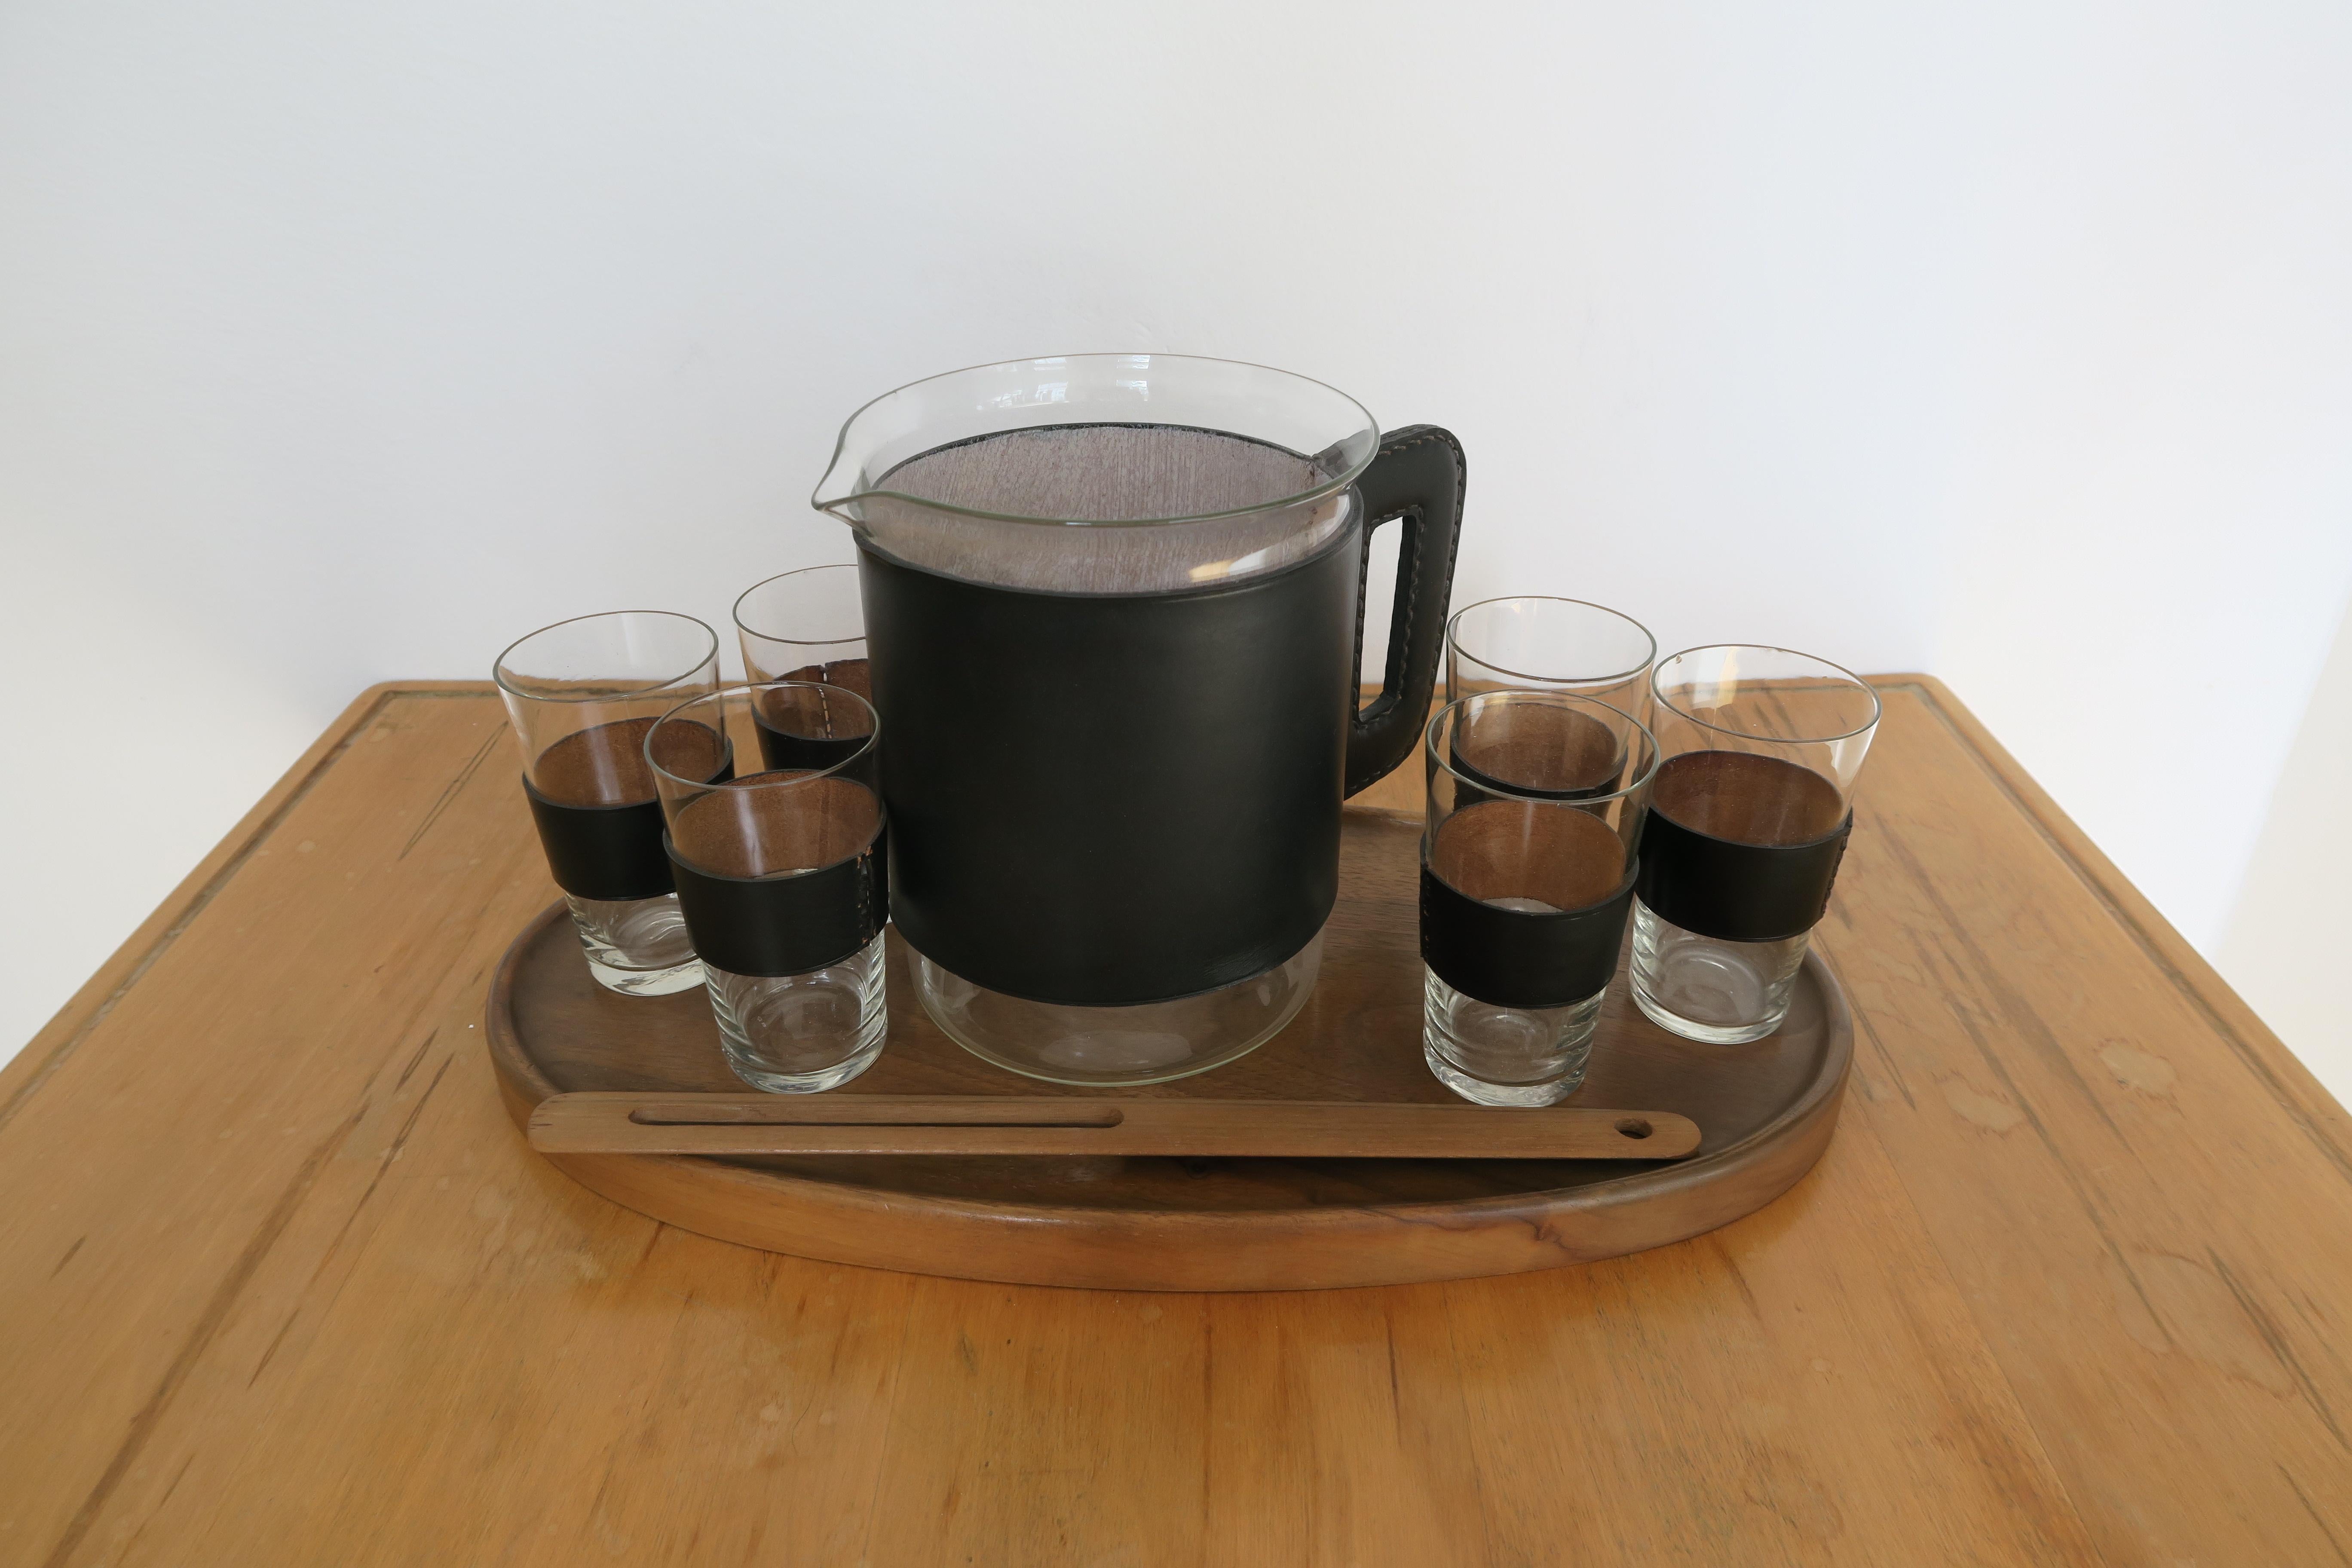 Rare complete serving set of 6 small leather wrapped drinking glasses (hight 9,6cm) and 1 glass pitcher (hight 16cm) featuring leather coverings with intricate stitching. Everything is in great condition (except 2 of the small glasses; see cond.